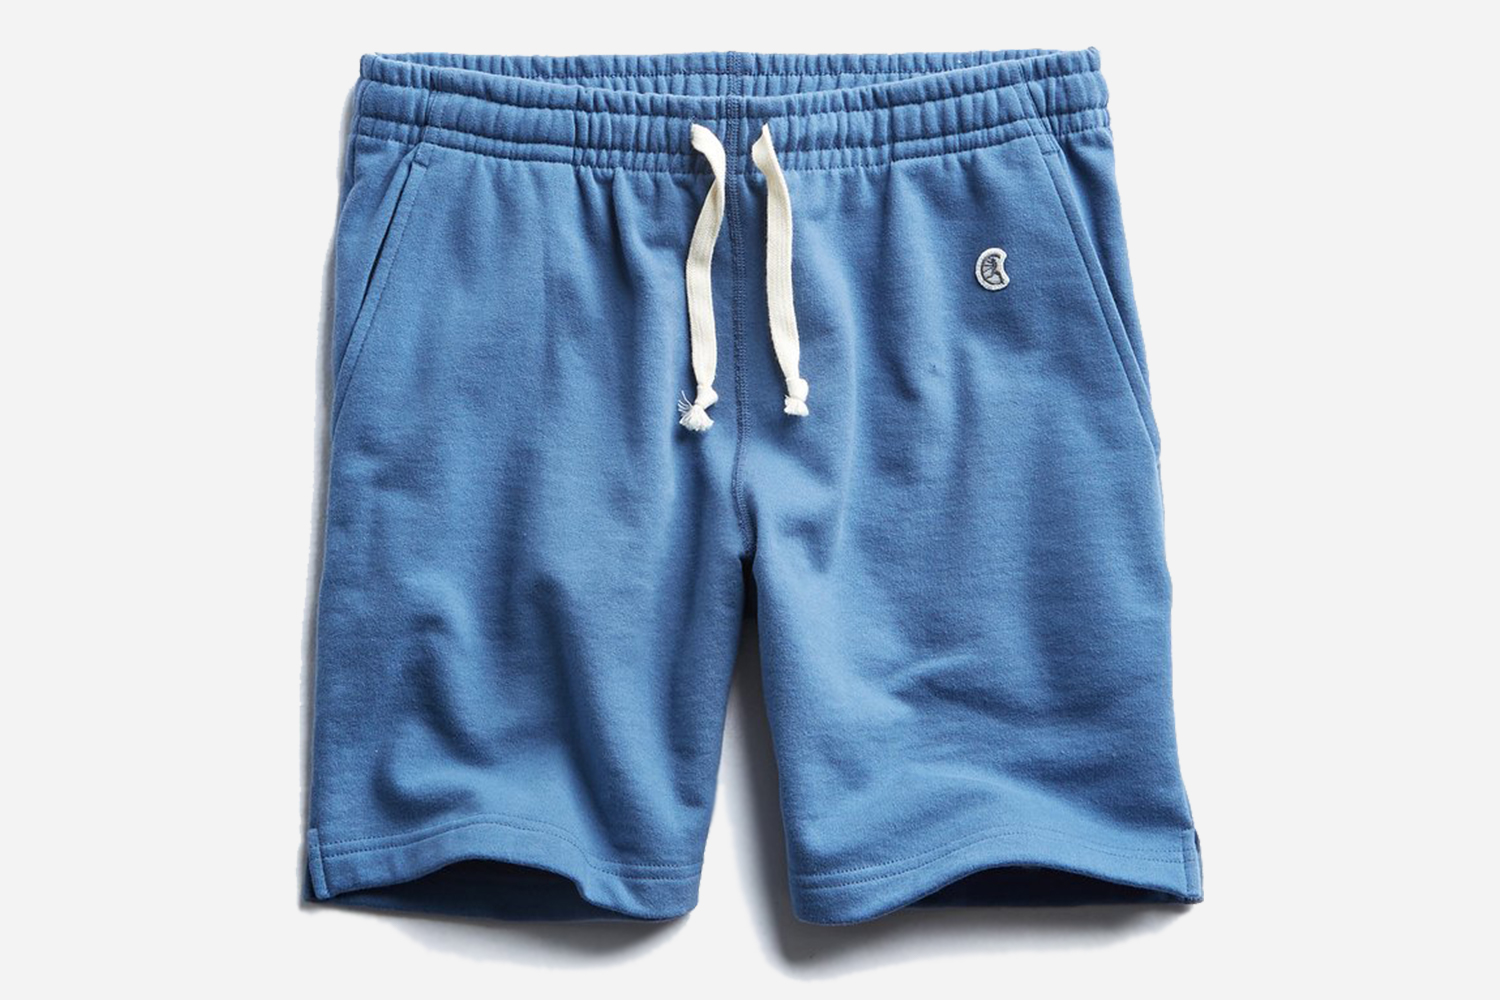 Todd Snyder Champion Terry Warm Up Shorts Clearance Sale